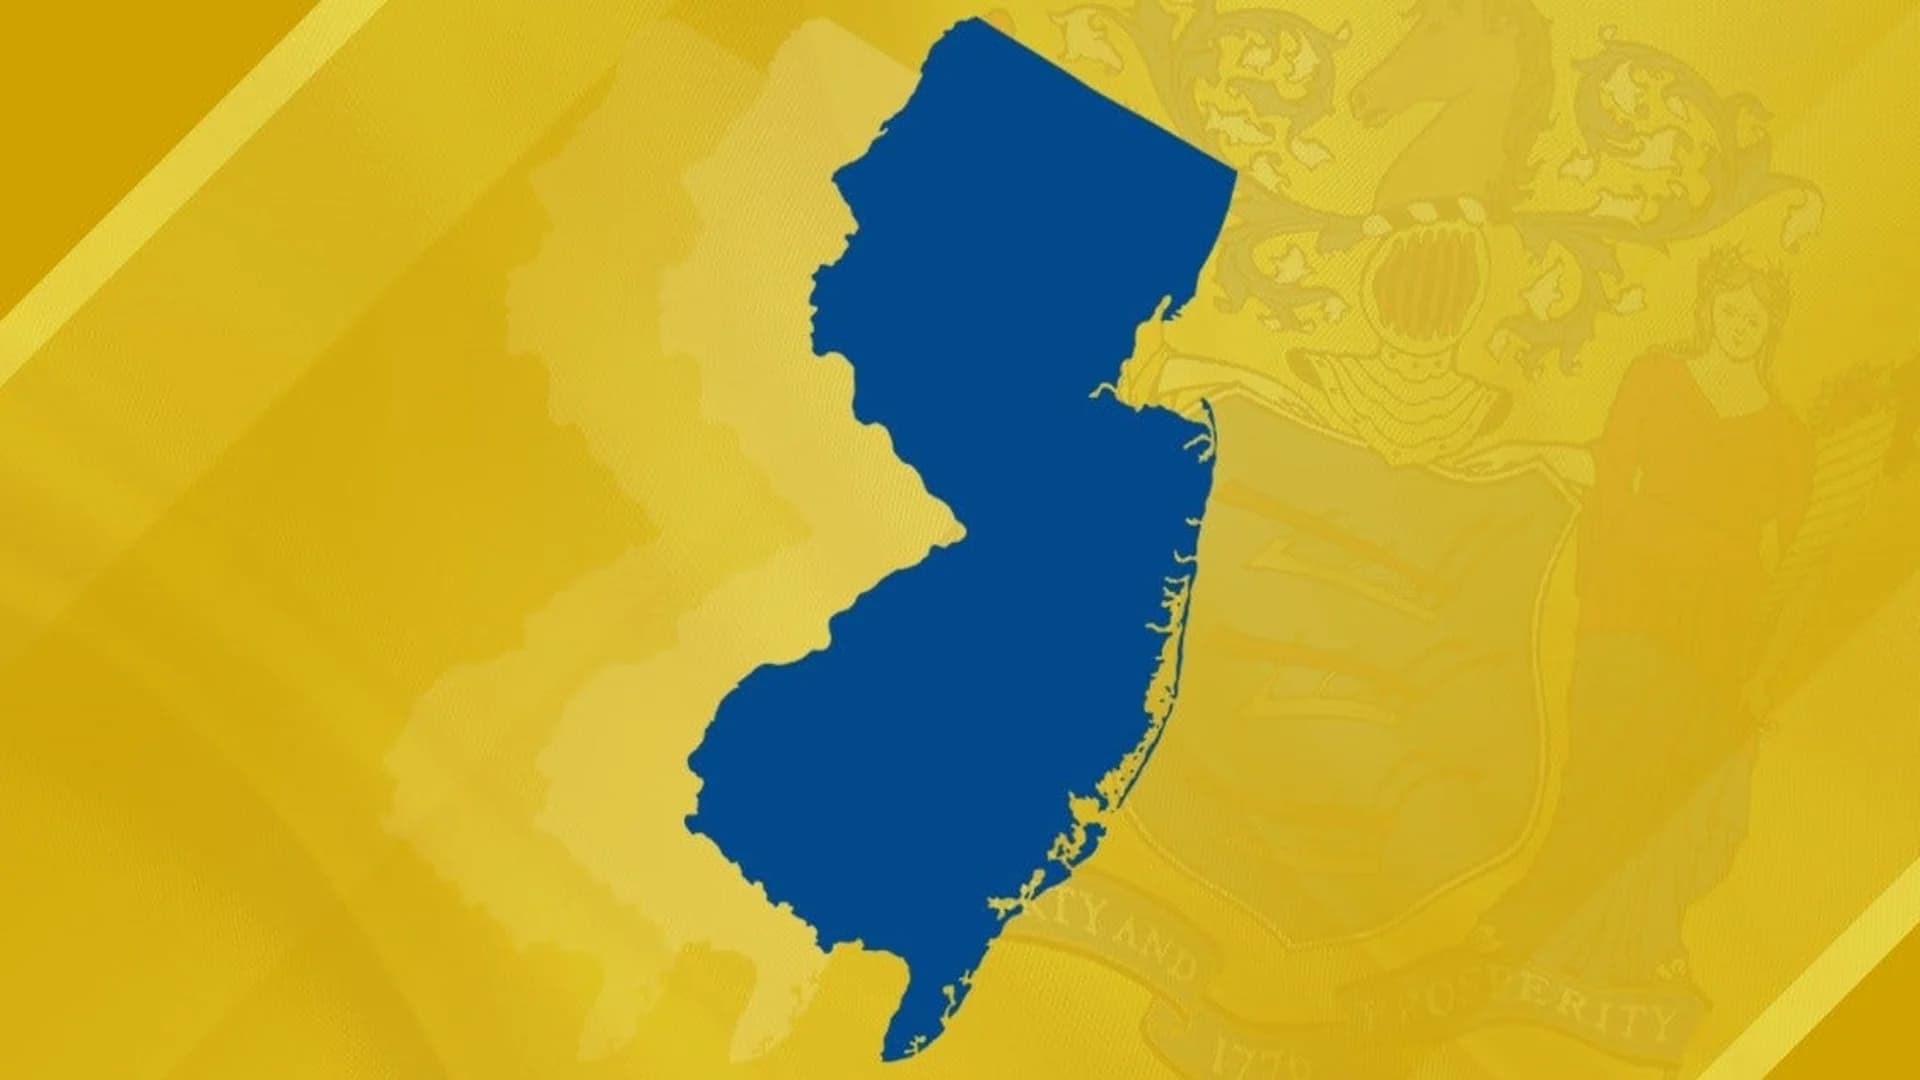 We've all gotten them: NJ ranked 5th state most bothered by robocalls